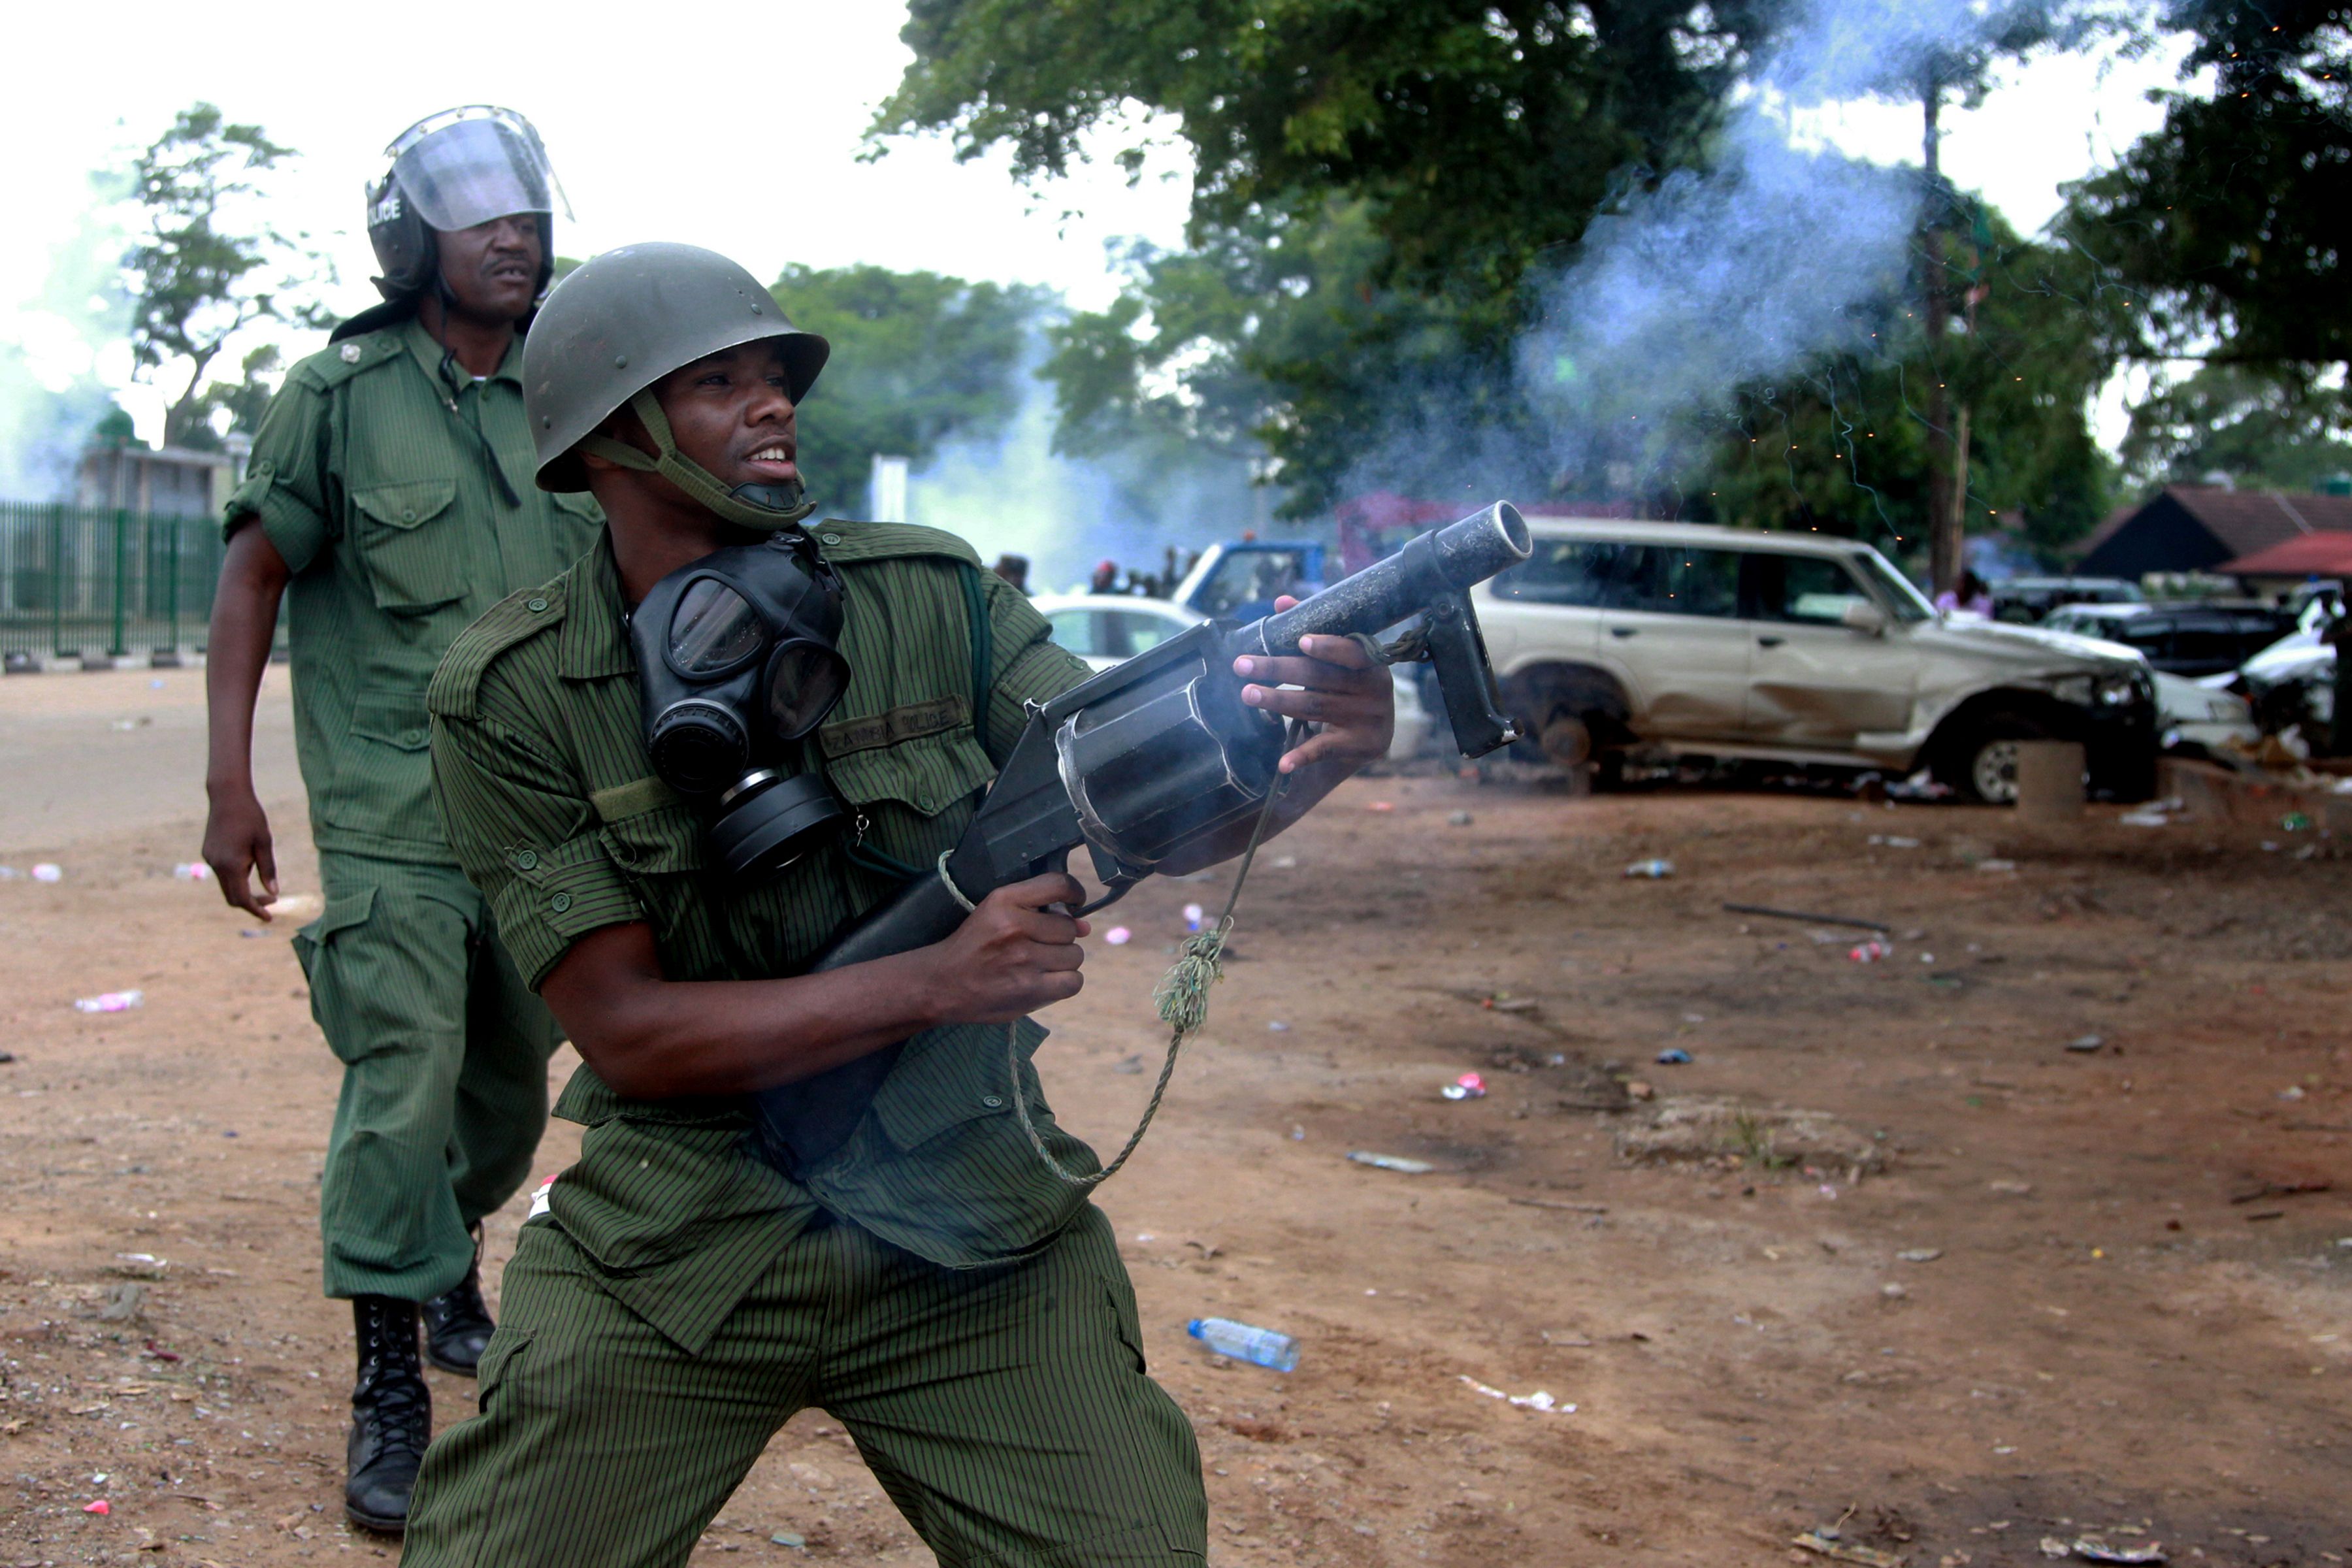 A Zambian police officer fires tear gas to supporters of the opposition United Party for National Development (UPND) outside the Woodlands Police Station in Lusaka on March 2, 2016. The supporters turned to show solidarity to their party vice-president Geofrey Mwamba who has since been arrested and charged with unlawful drilling. / AFP / Dawood SALIM        (Photo credit should read DAWOOD SALIM/AFP/Getty Images)